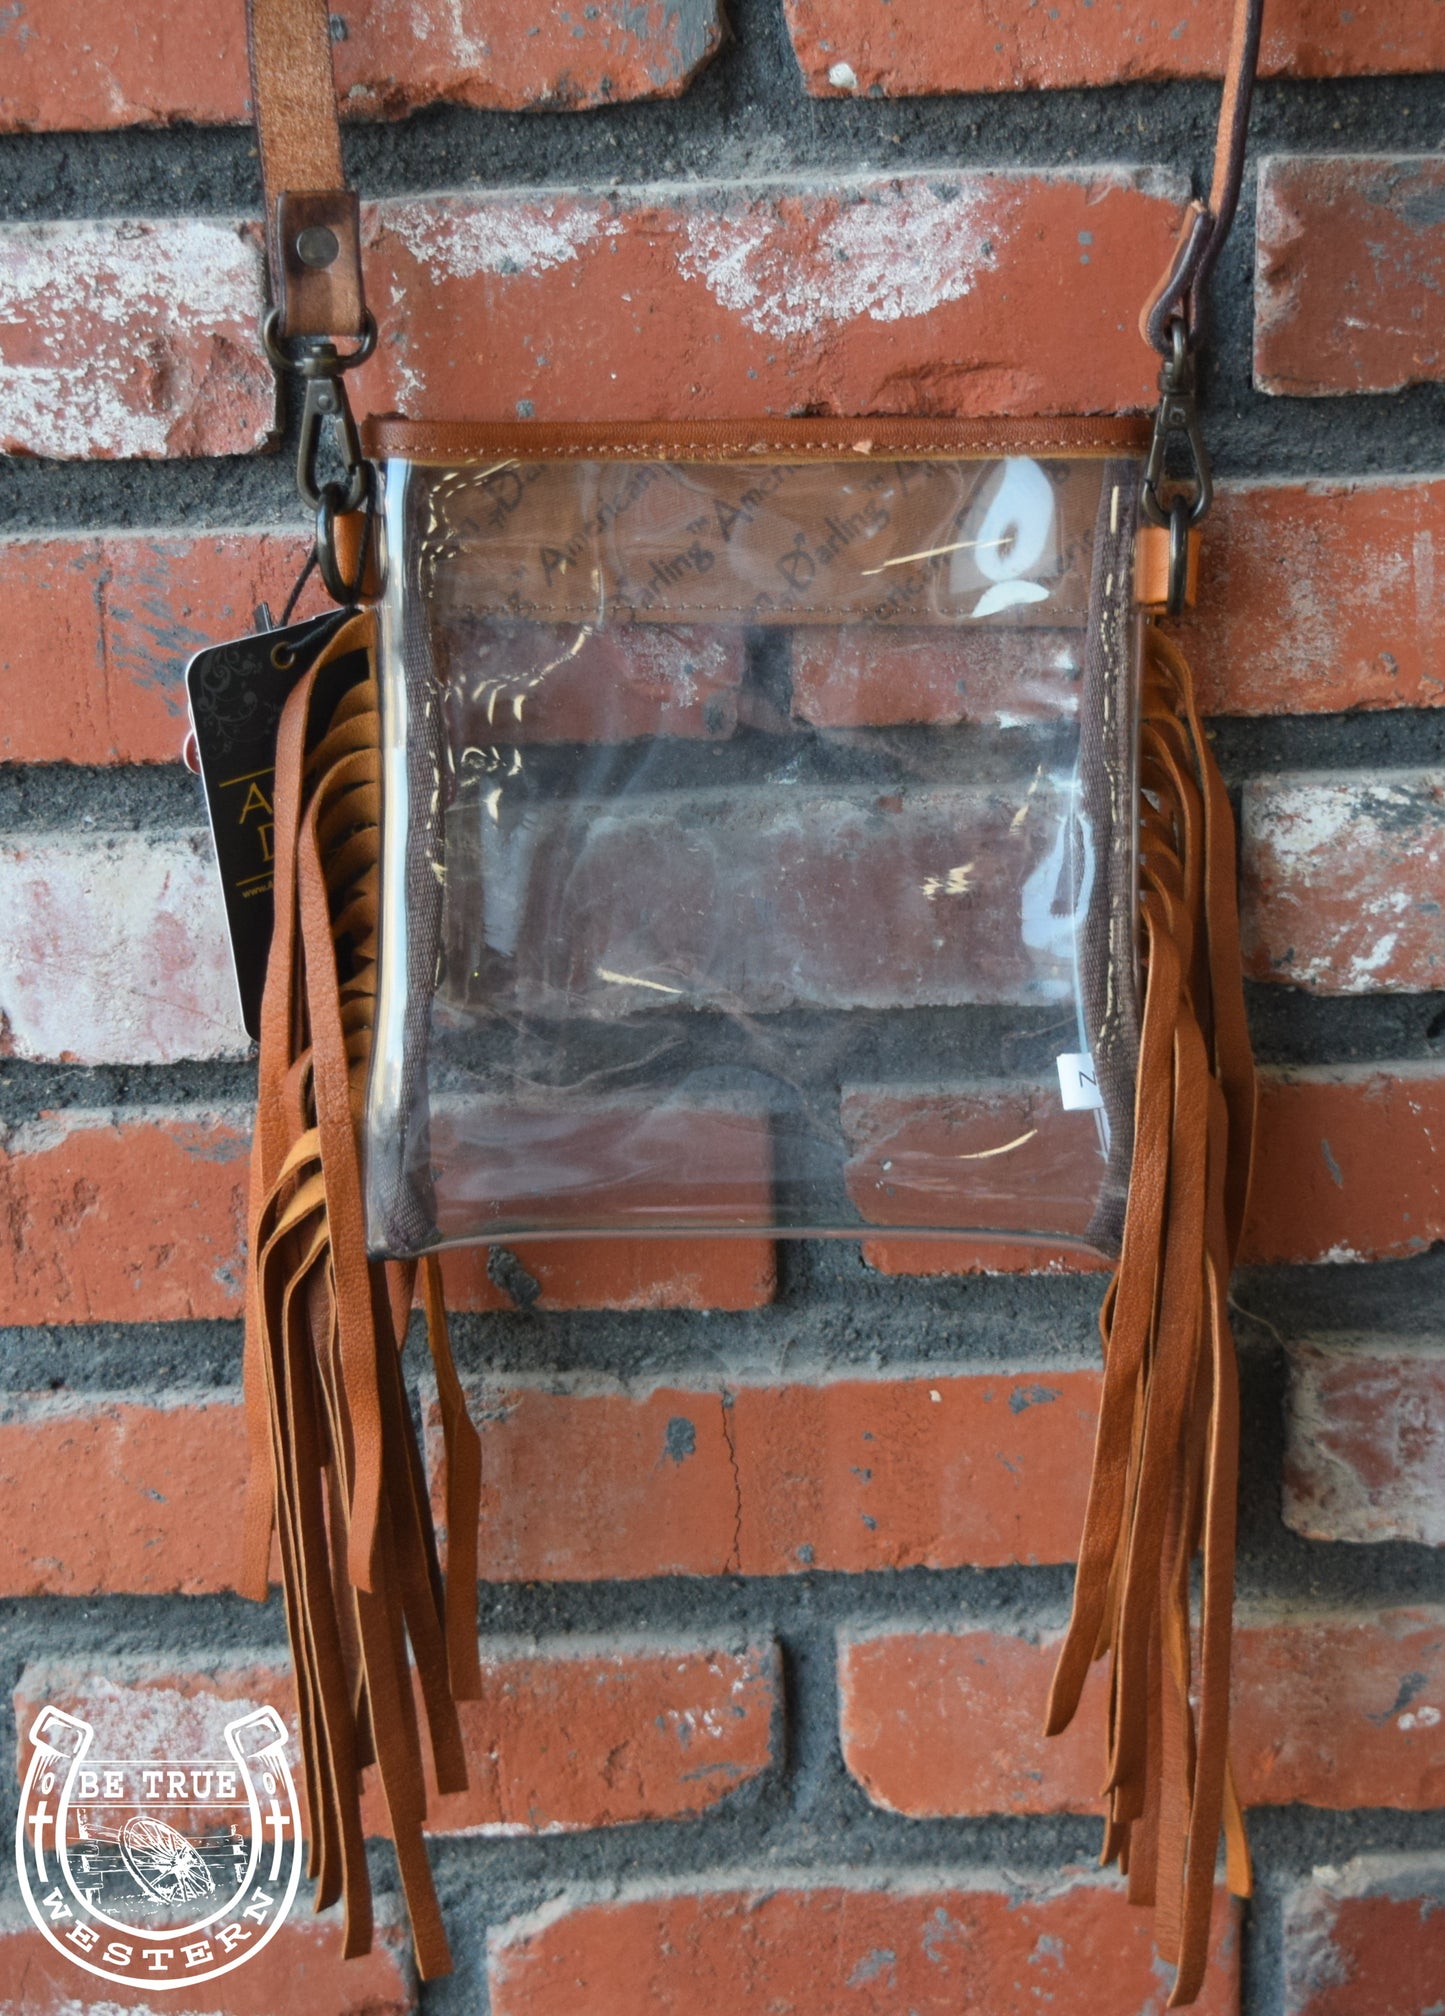 The Clear Cross Body Bag